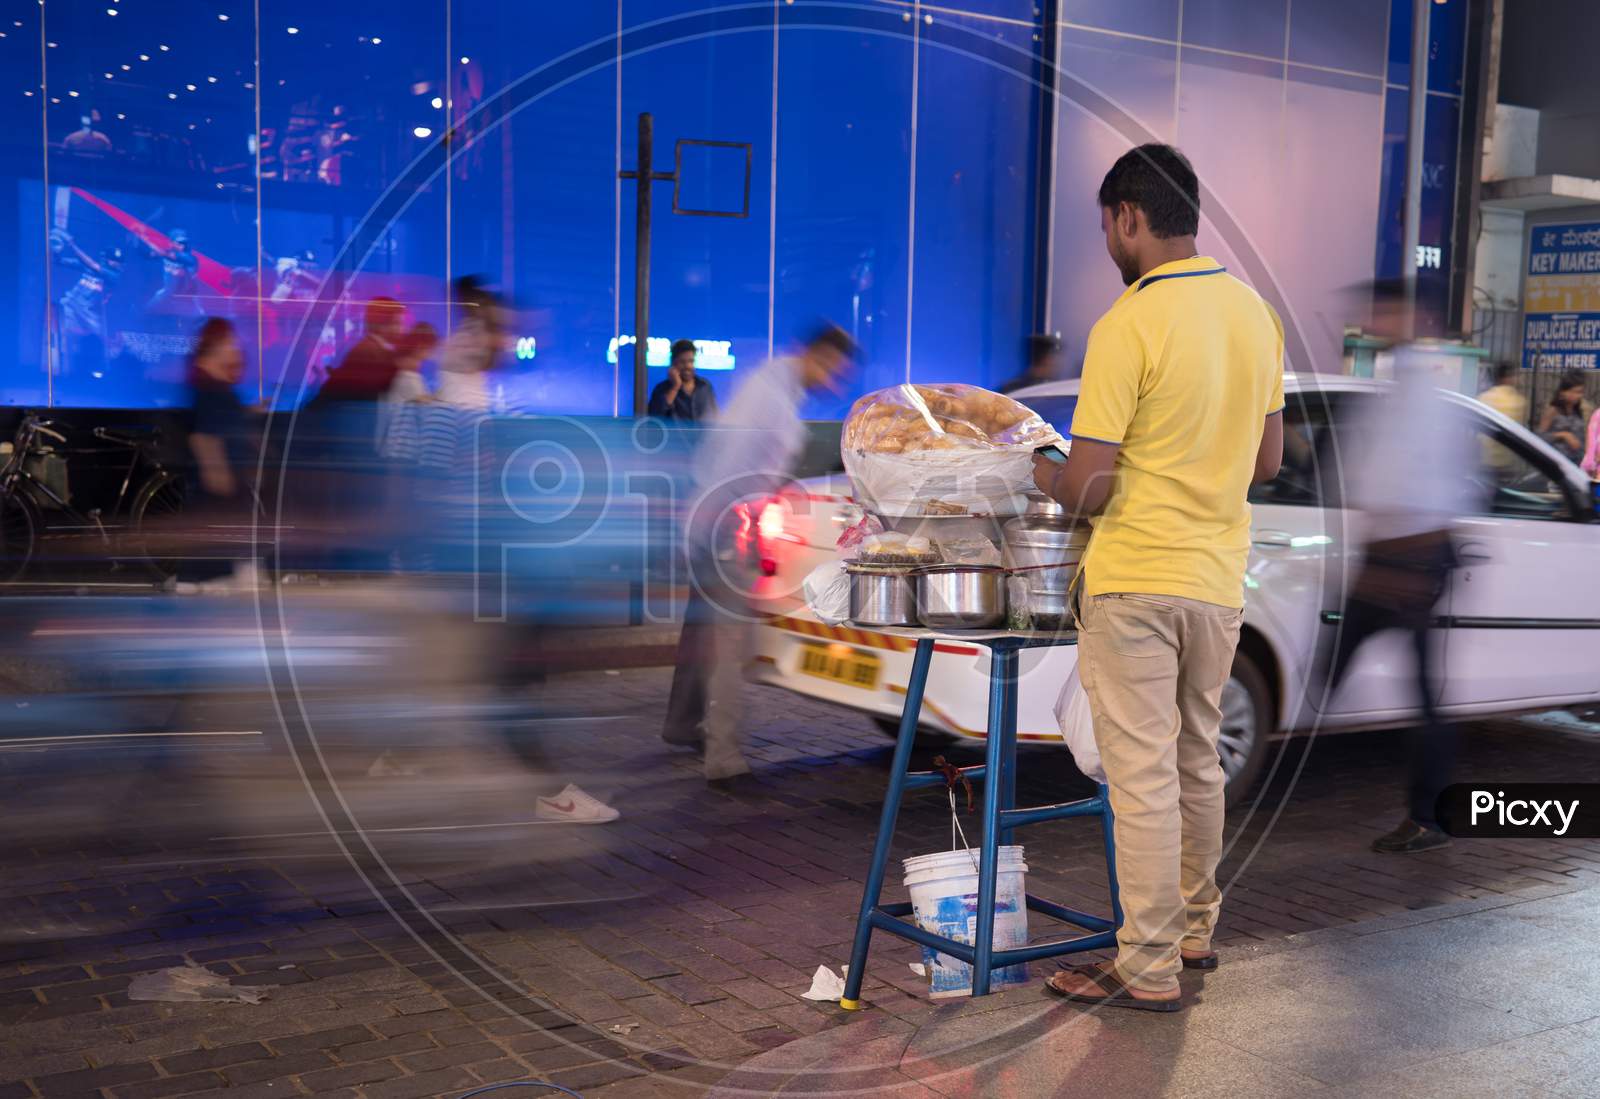 Bengaluru, Karnataka, India - November 08 2019: A man selling 'paani puri' a famous Indian snack on the road ride and people in the background in motion blur during evening